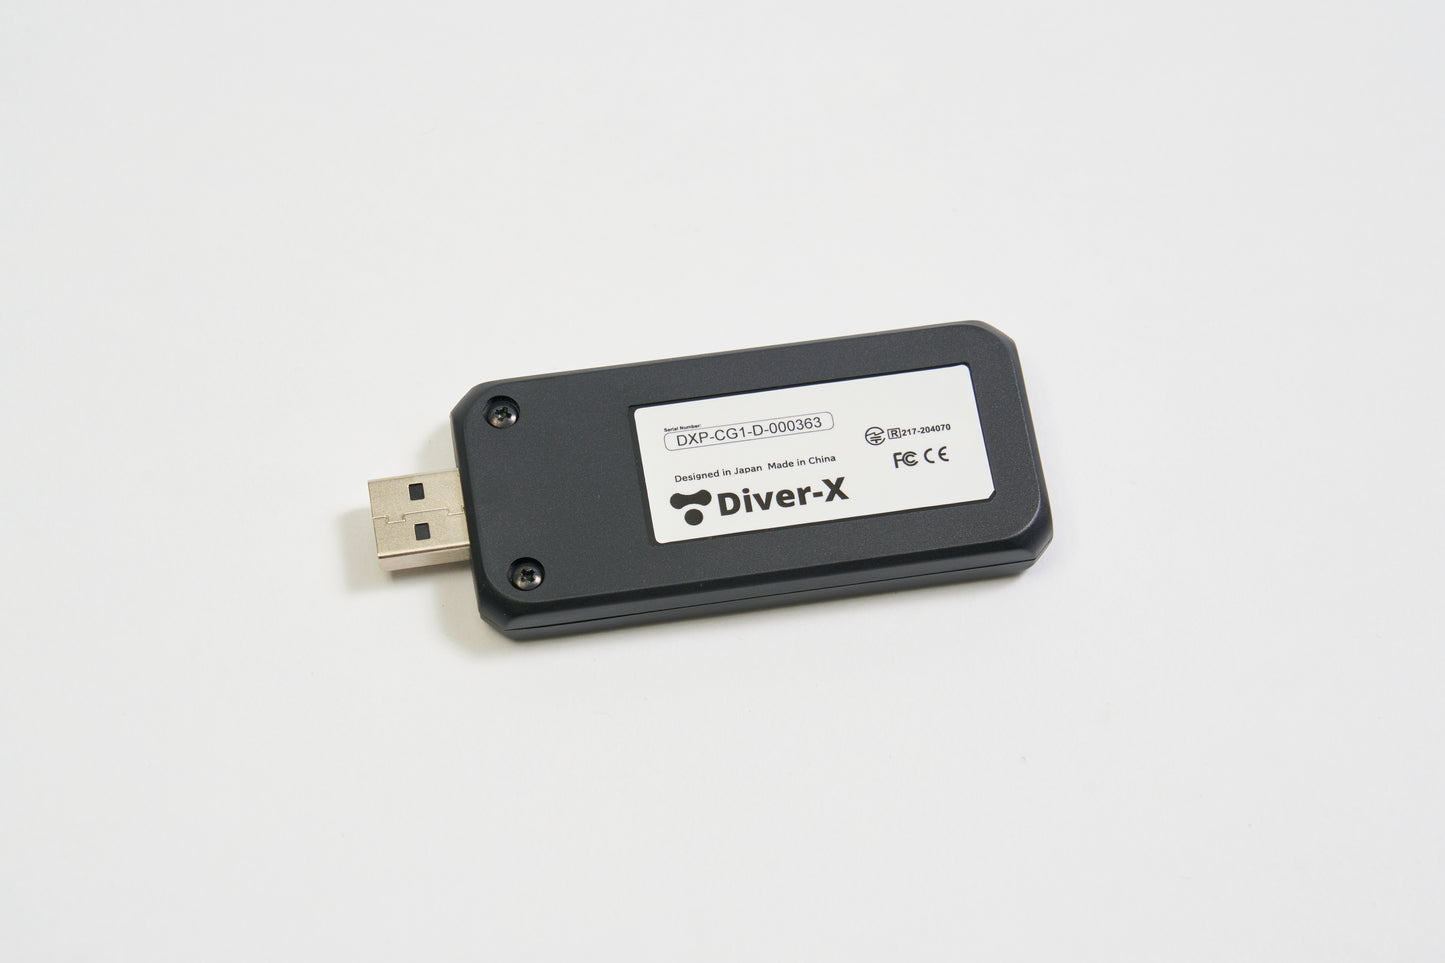 USB dongle for ContactGlove